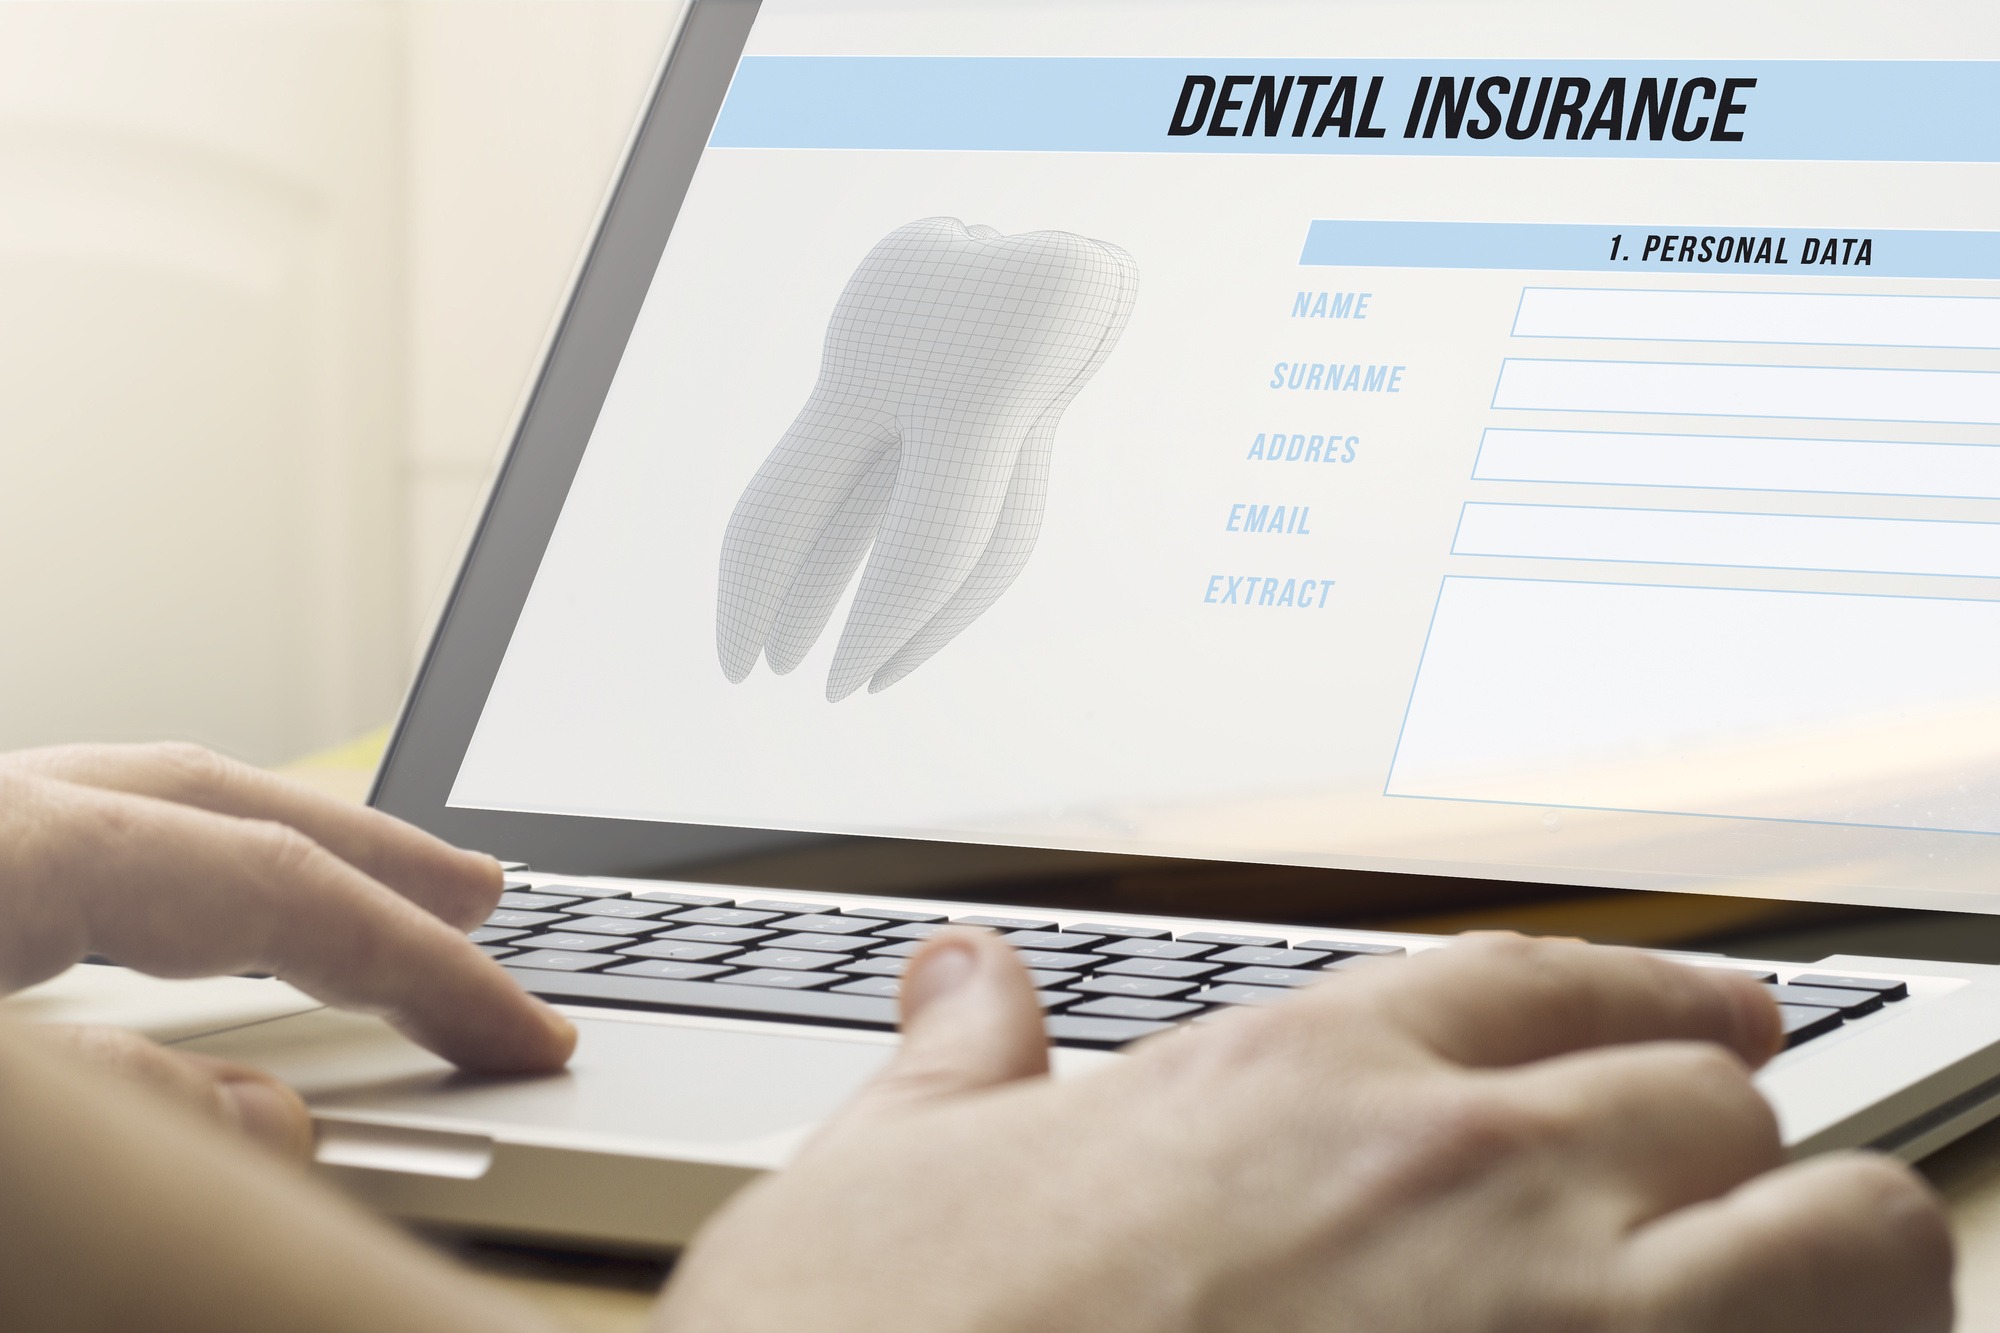 Is Dental Insurance Worth It? Here Are 8 Alternatives to